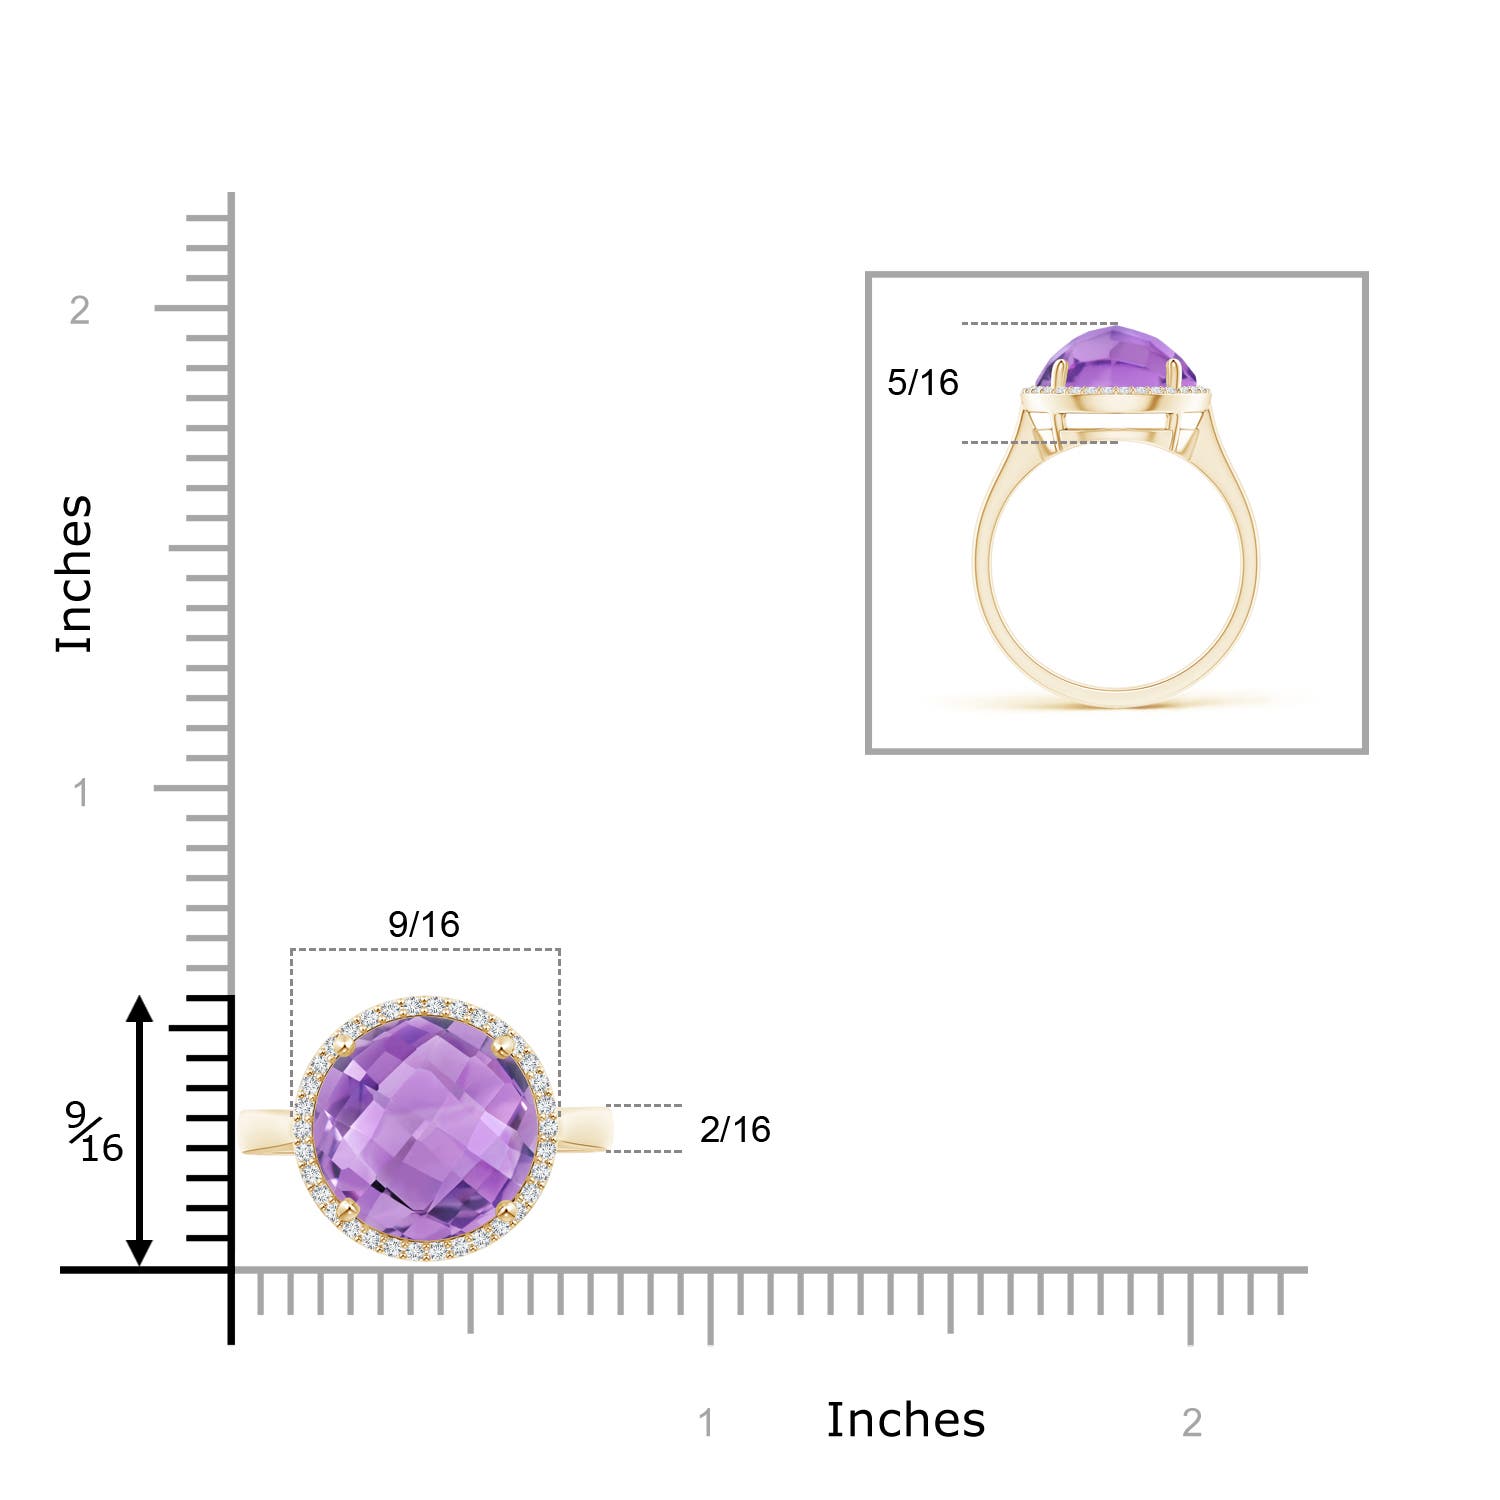 A - Amethyst / 5.7 CT / 14 KT Yellow Gold